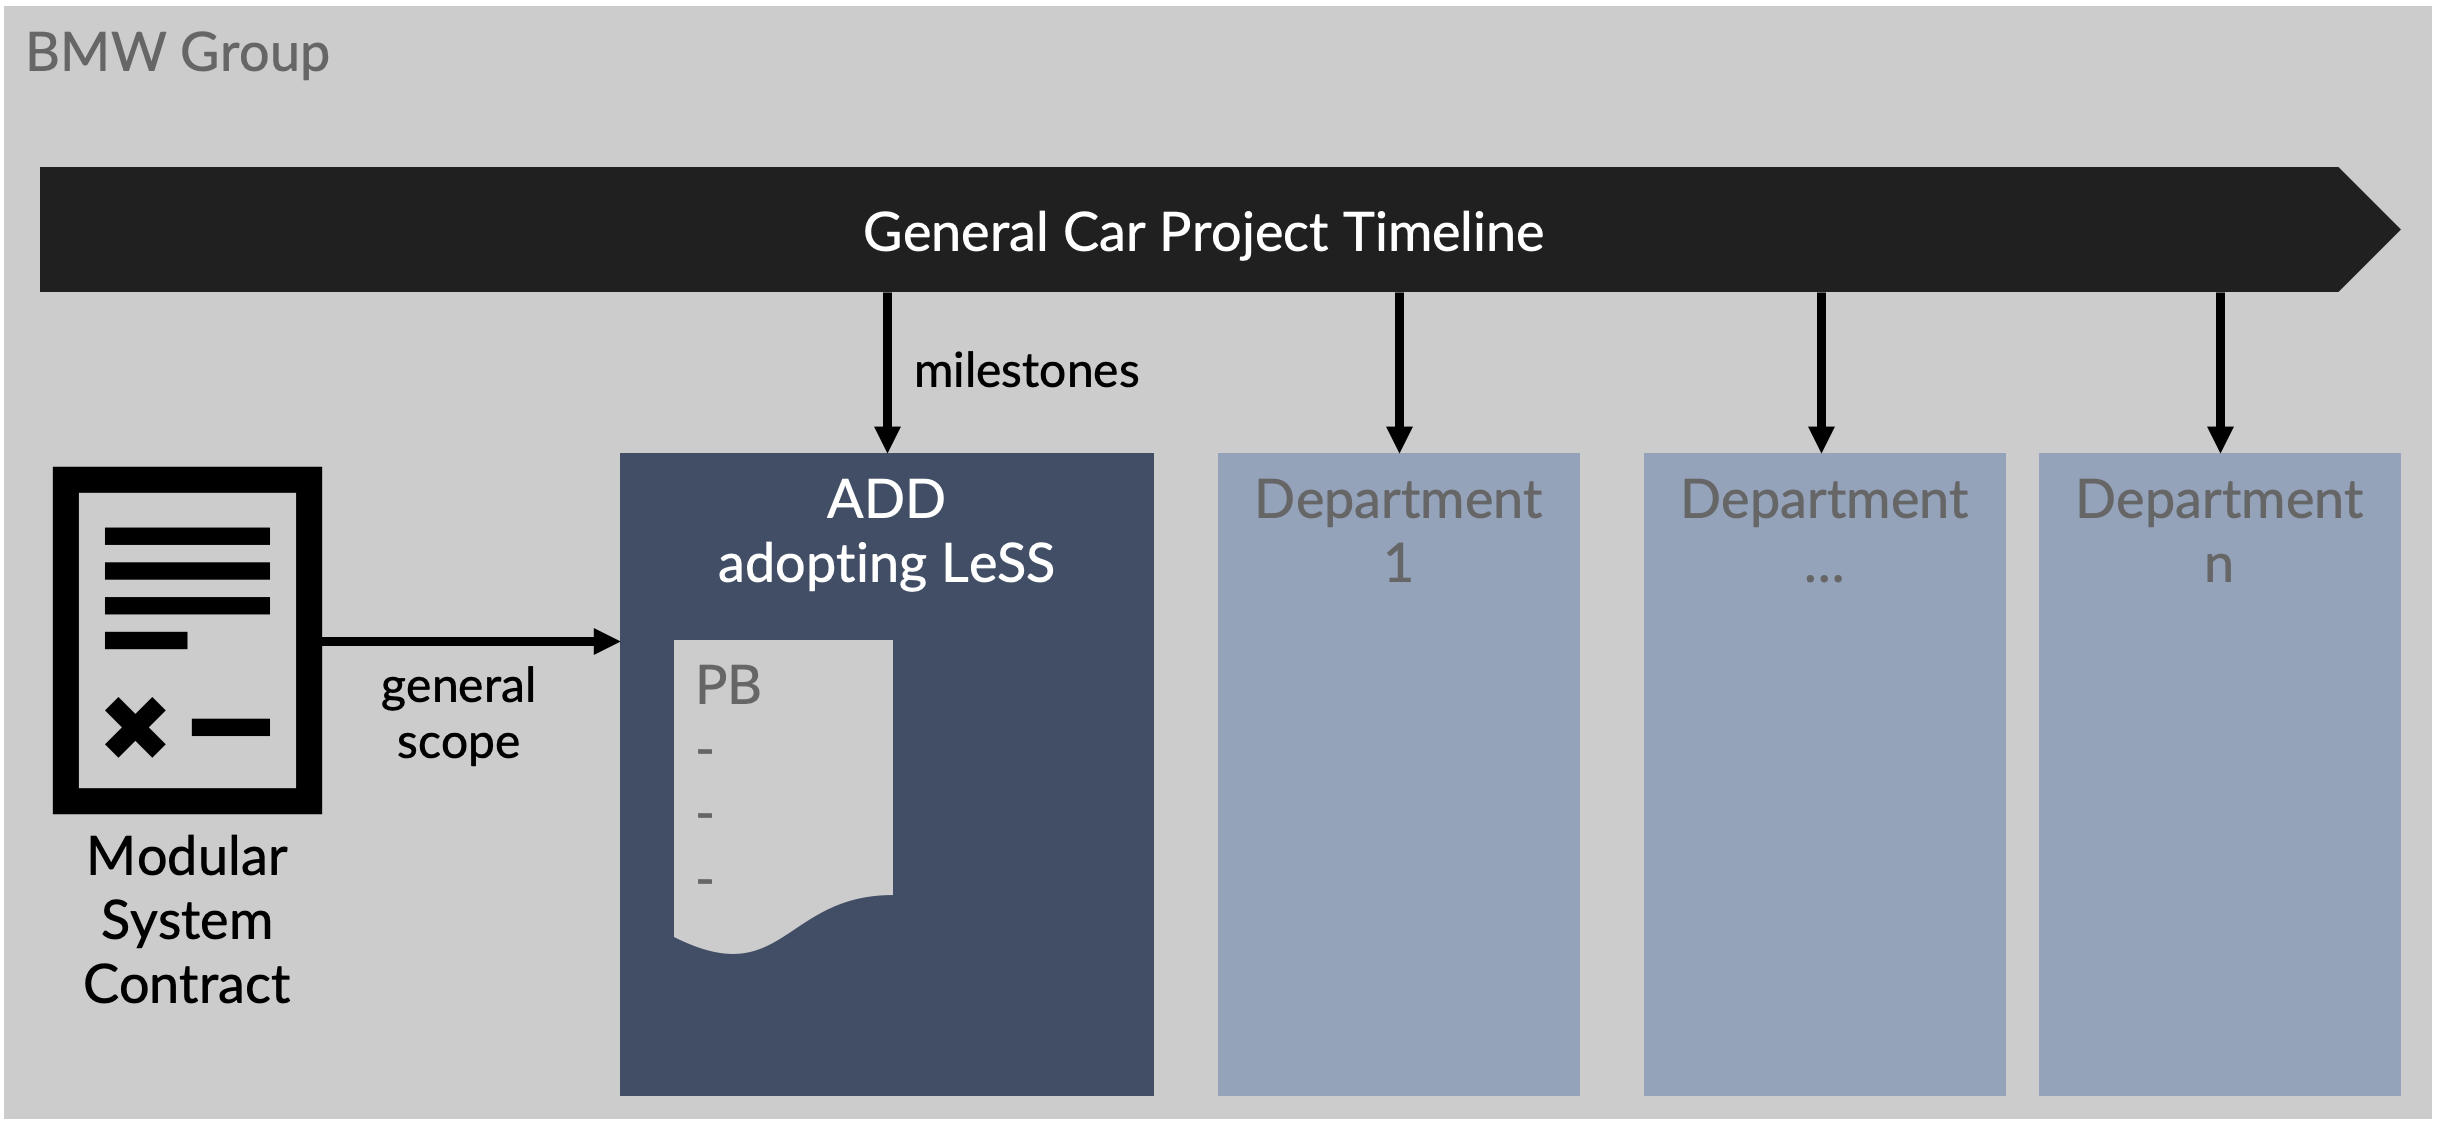 ADD-external constraints which should influence the Product Backlog.